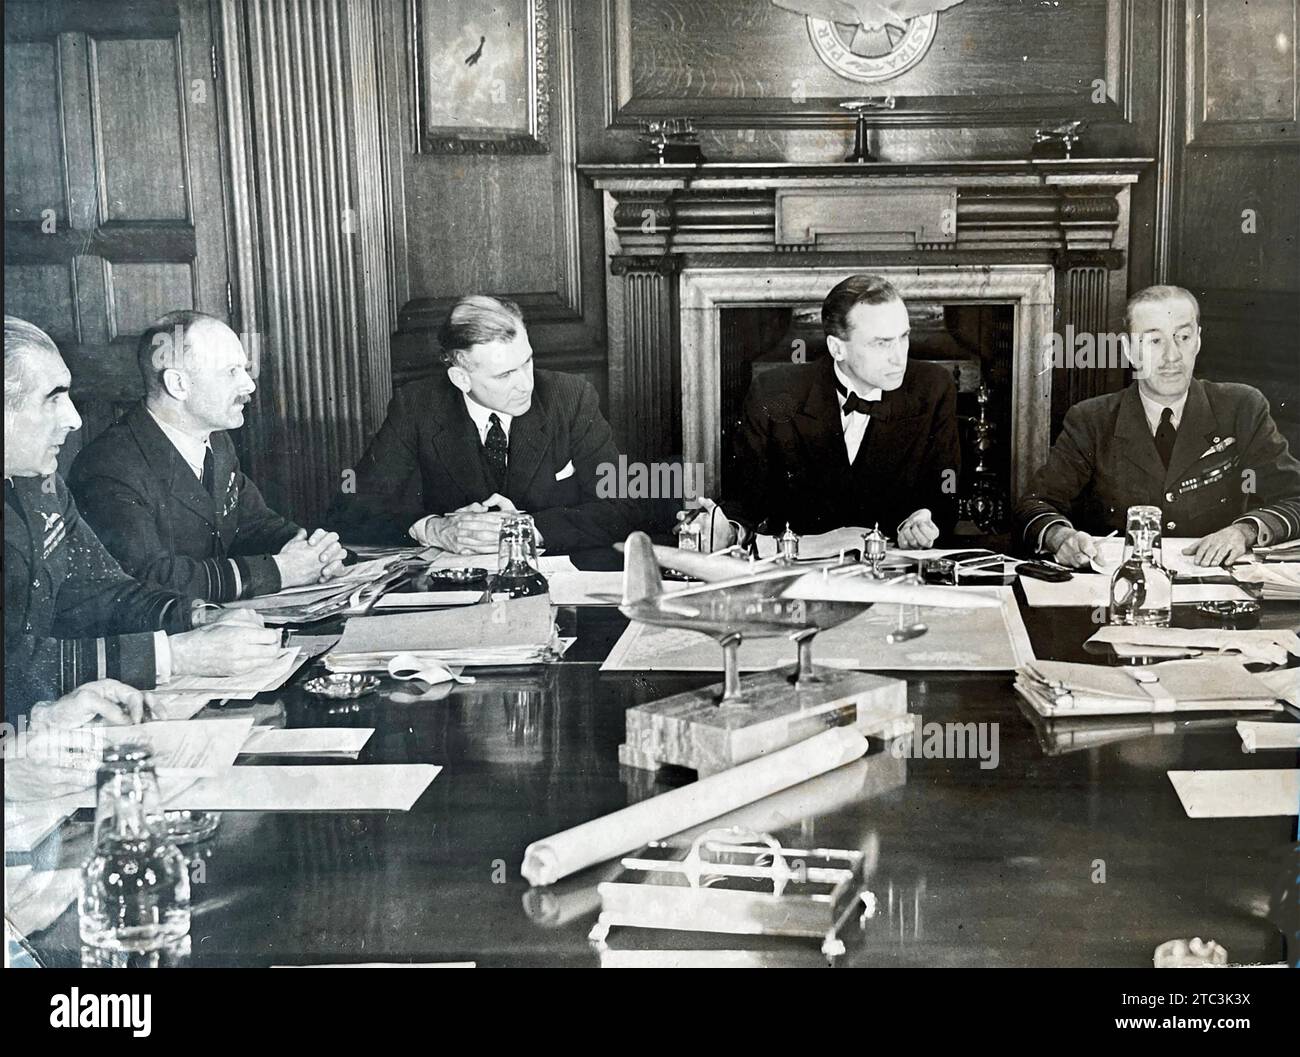 BRITISH AIR COUNCIL IN SESSION  at the Air Ministry in London, July,1940. From Left: Air Marshal Sir Christopher Courtney (Air Member for Supply and Organisation), Air Marshall  E.L. Gossage (Air Member for Personnel), Capt. H.H. Balfour (Under Secretary of State for Air) , Sir Archibald Sinclair (Secretary  of State for Air, unknown. Stock Photo